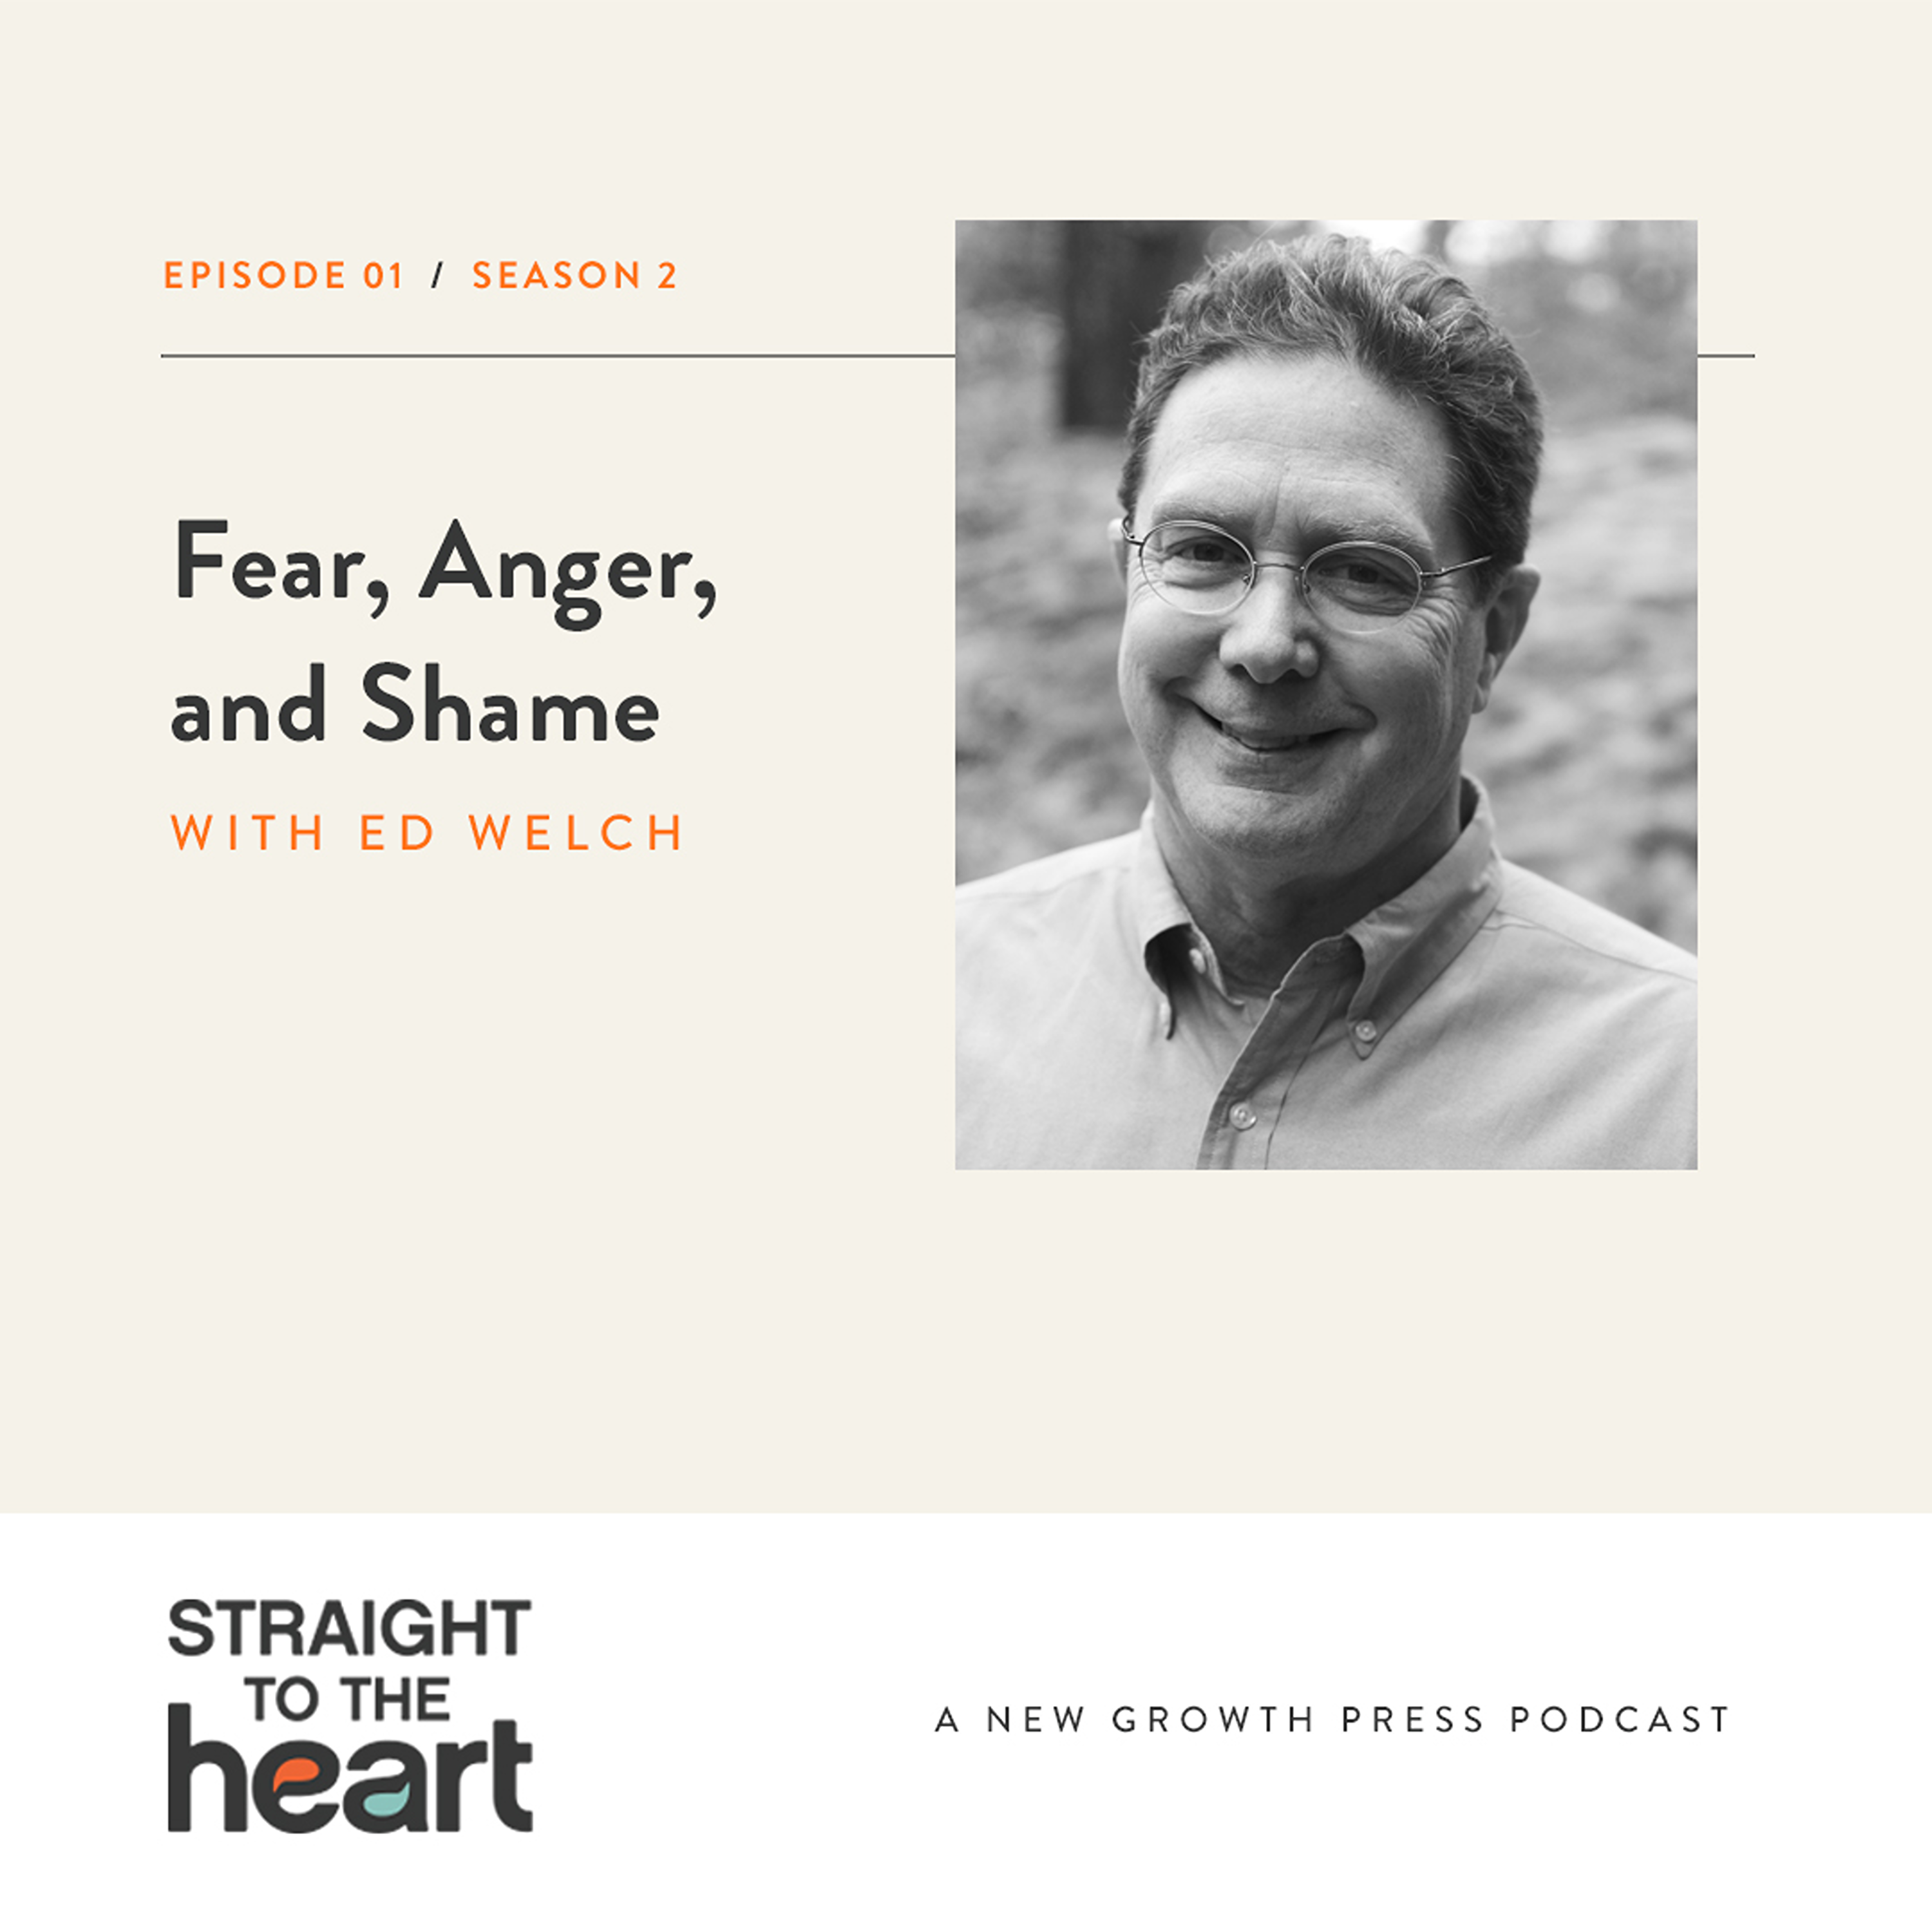 Fear, Anger, and Shame with Ed Welch